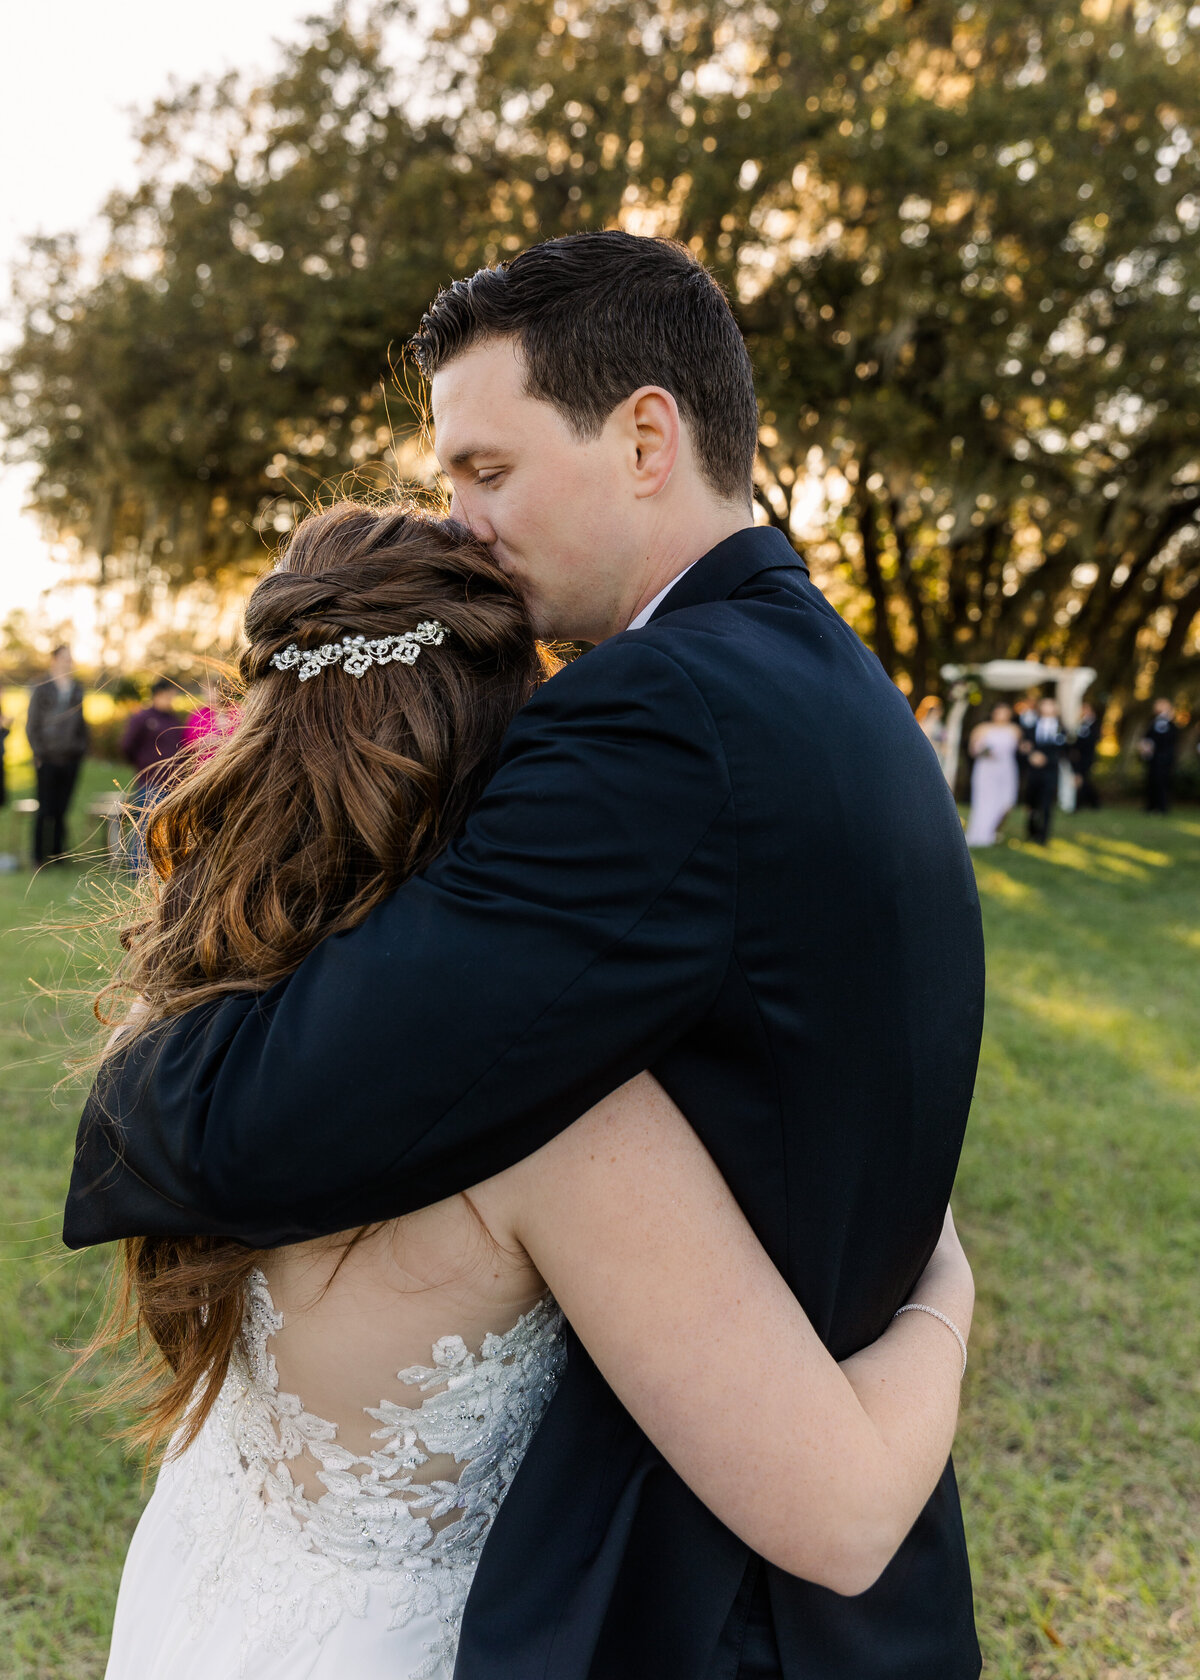 Bride and Groom together after  ceremony at wedding Orlando Florida captured by Orlando Wedding Photographer Blak Marie Photography